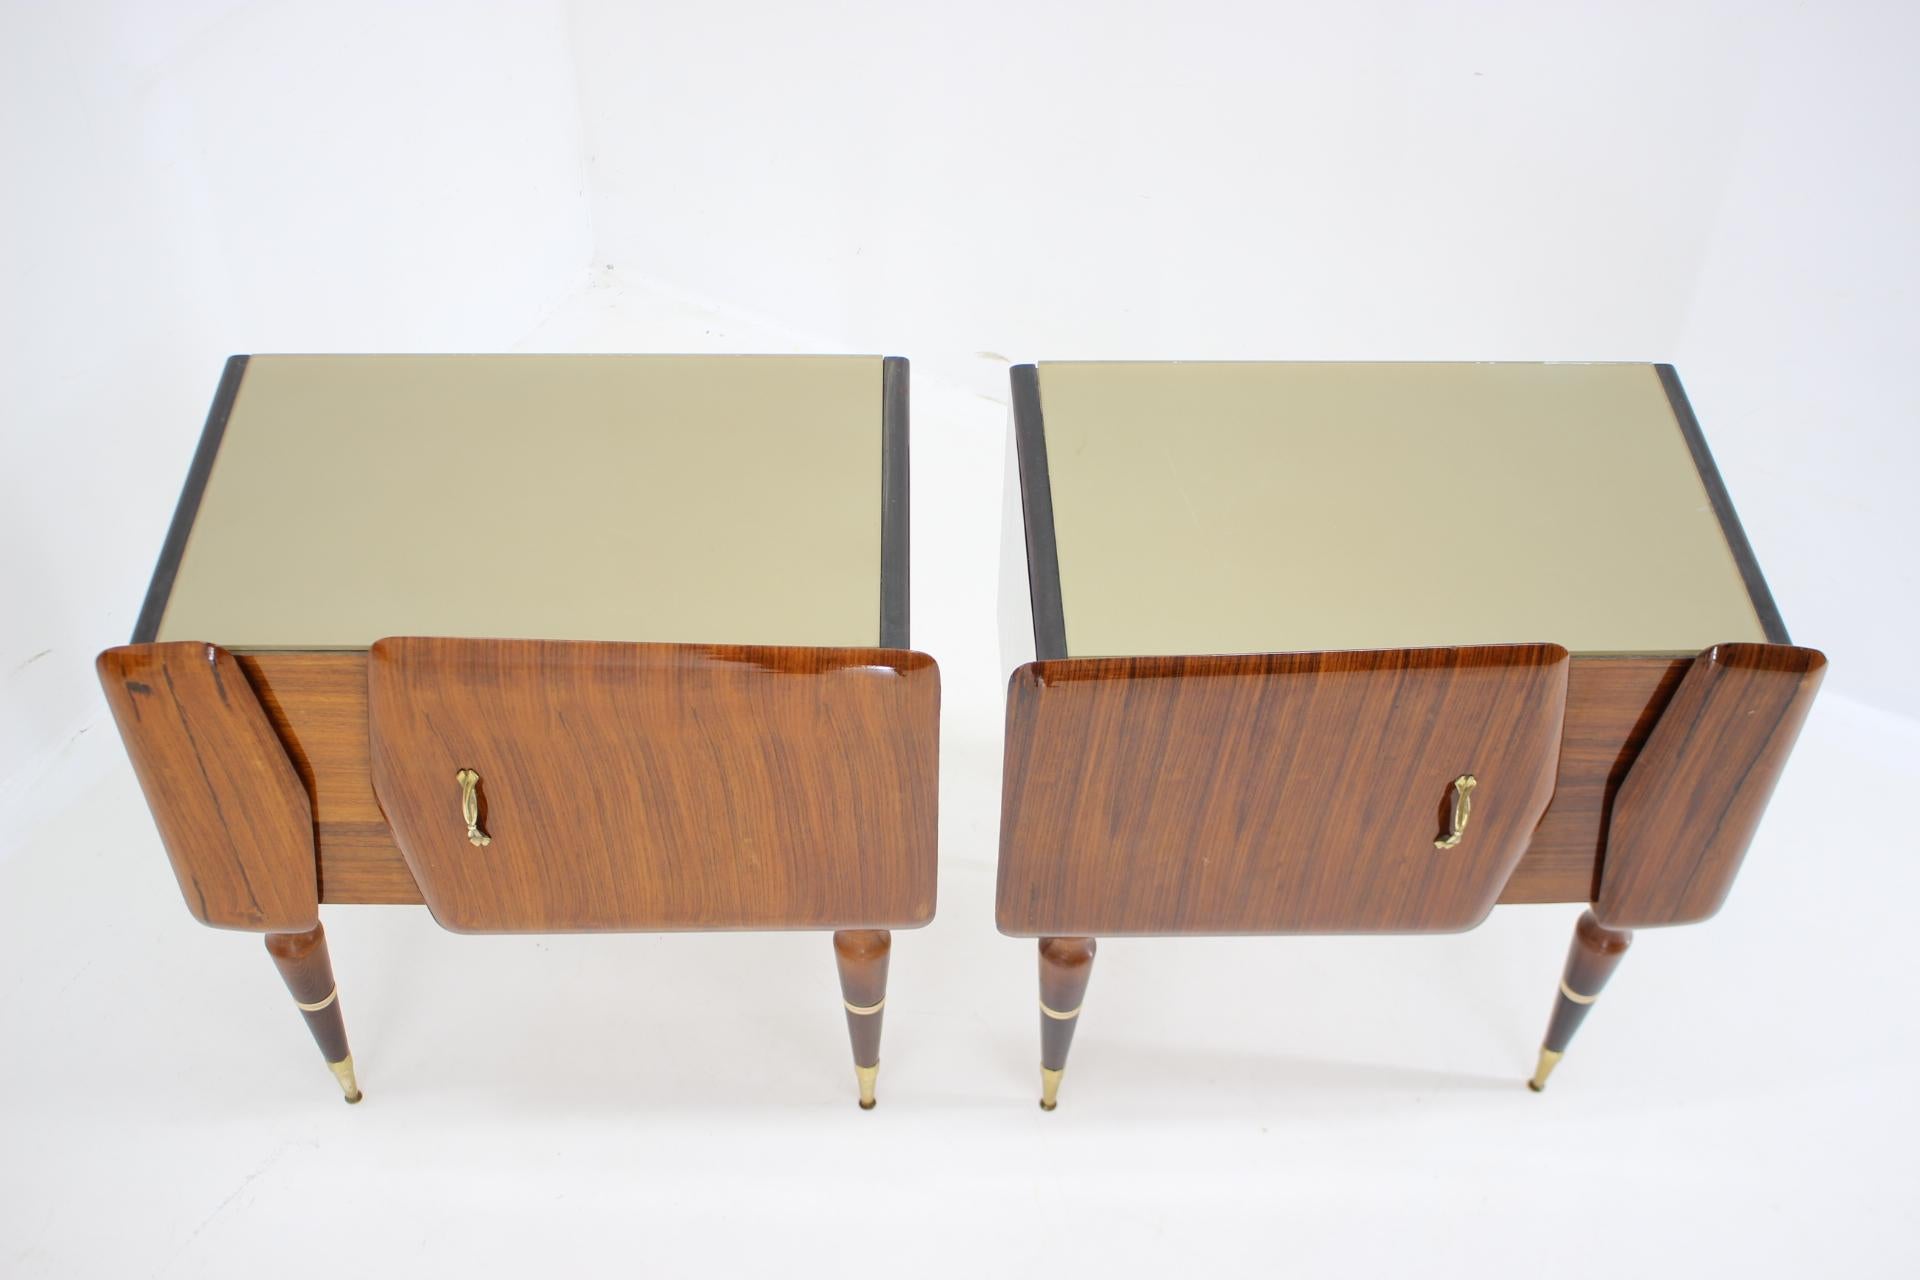 1960s Set of Sculptural Wooden Bedside Tables and Sideboard, Italy For Sale 2